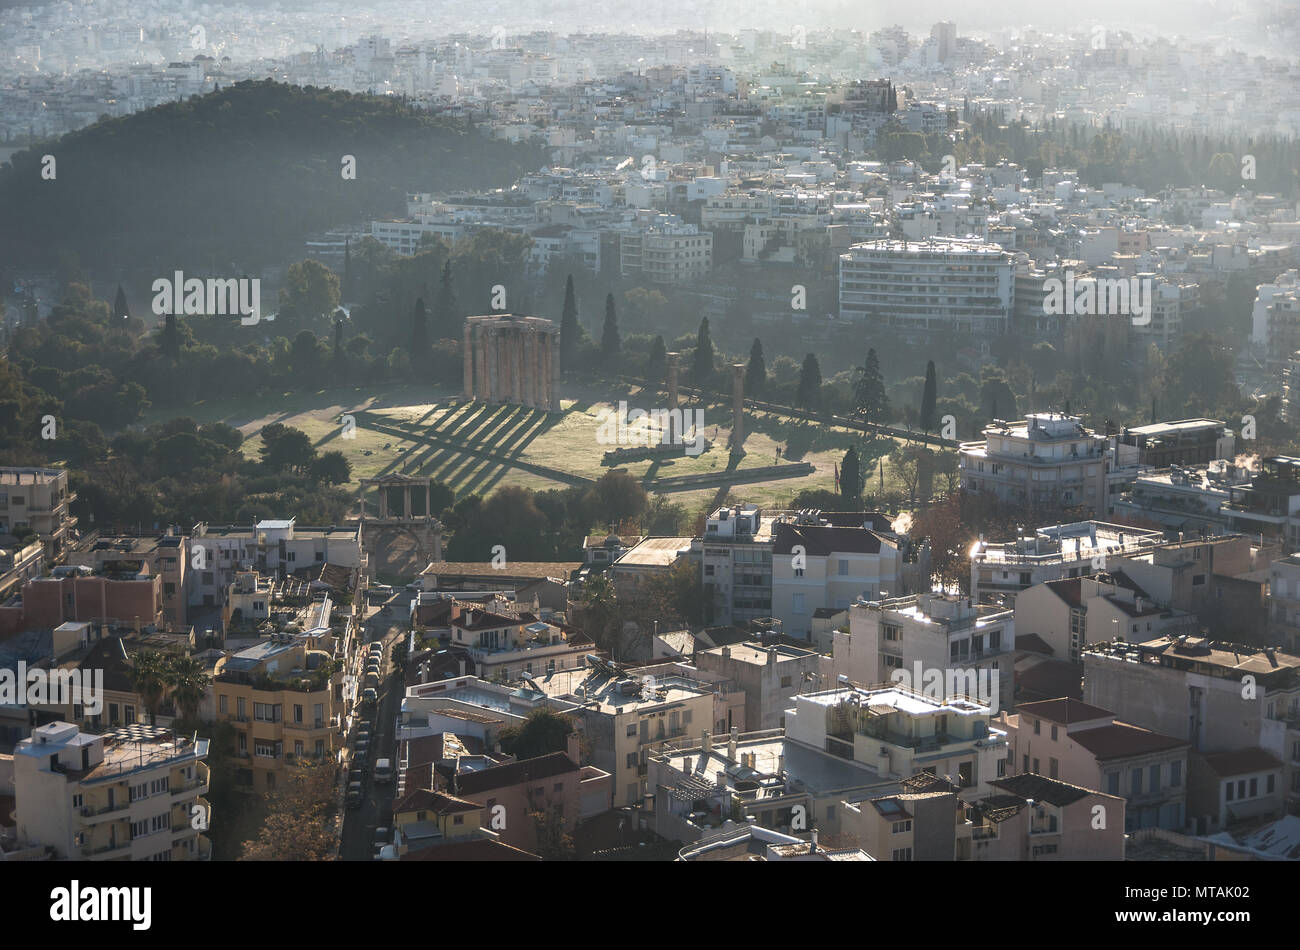 Temple of Olympian Zeus view from Acropolis Hill, Athens, Greece Stock Photo